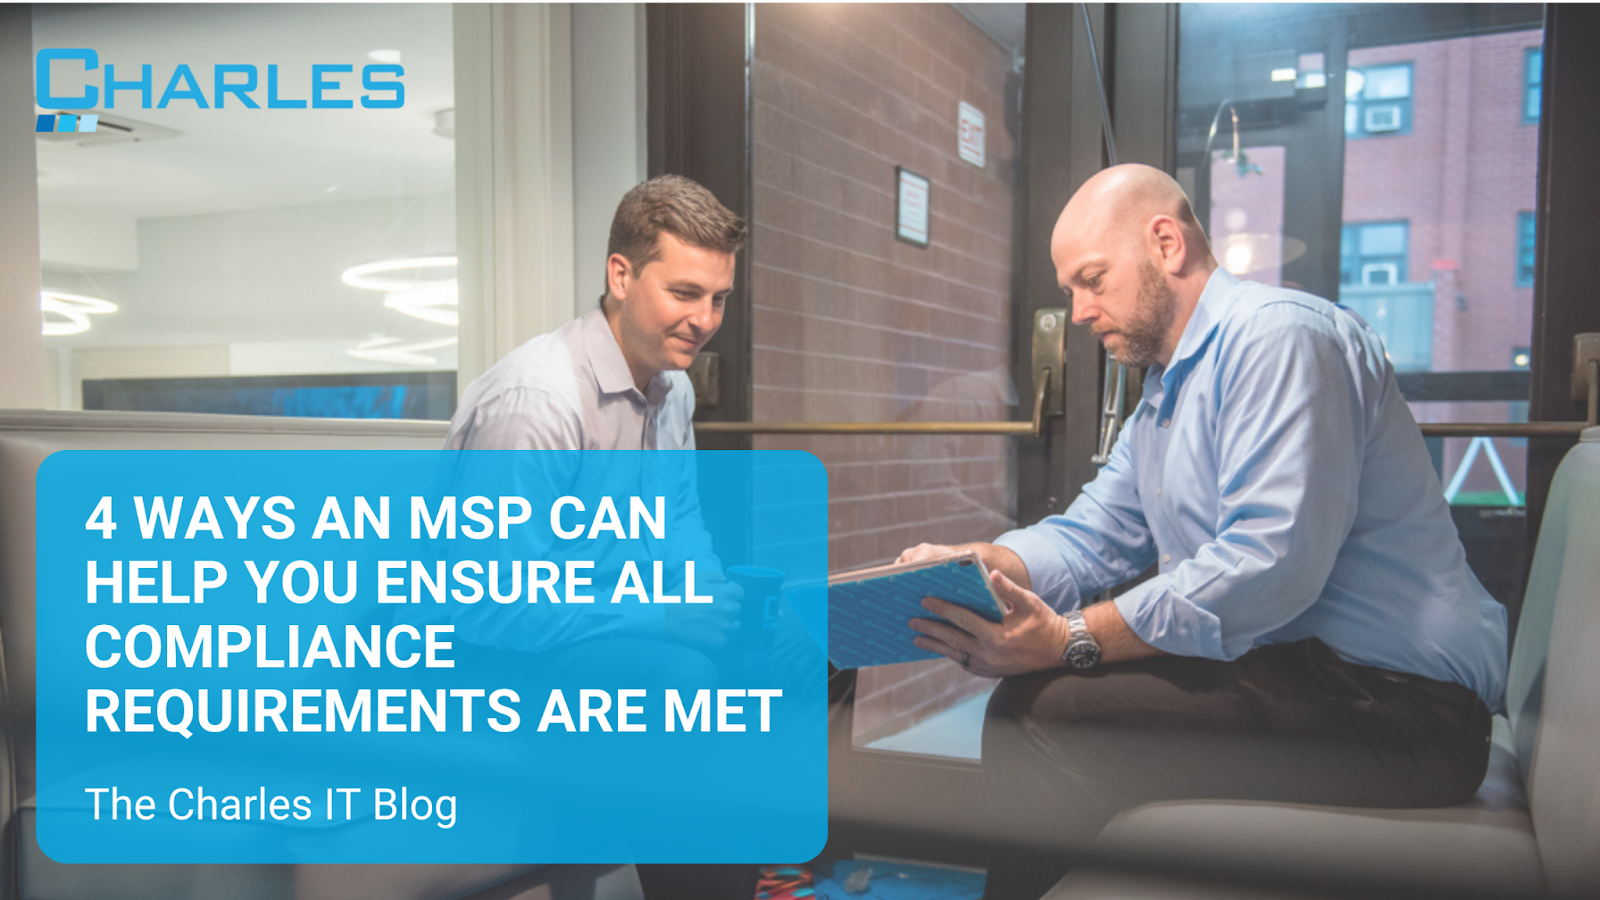 4 Ways an MSP Can Help You Ensure All Compliance Requirements Are Met